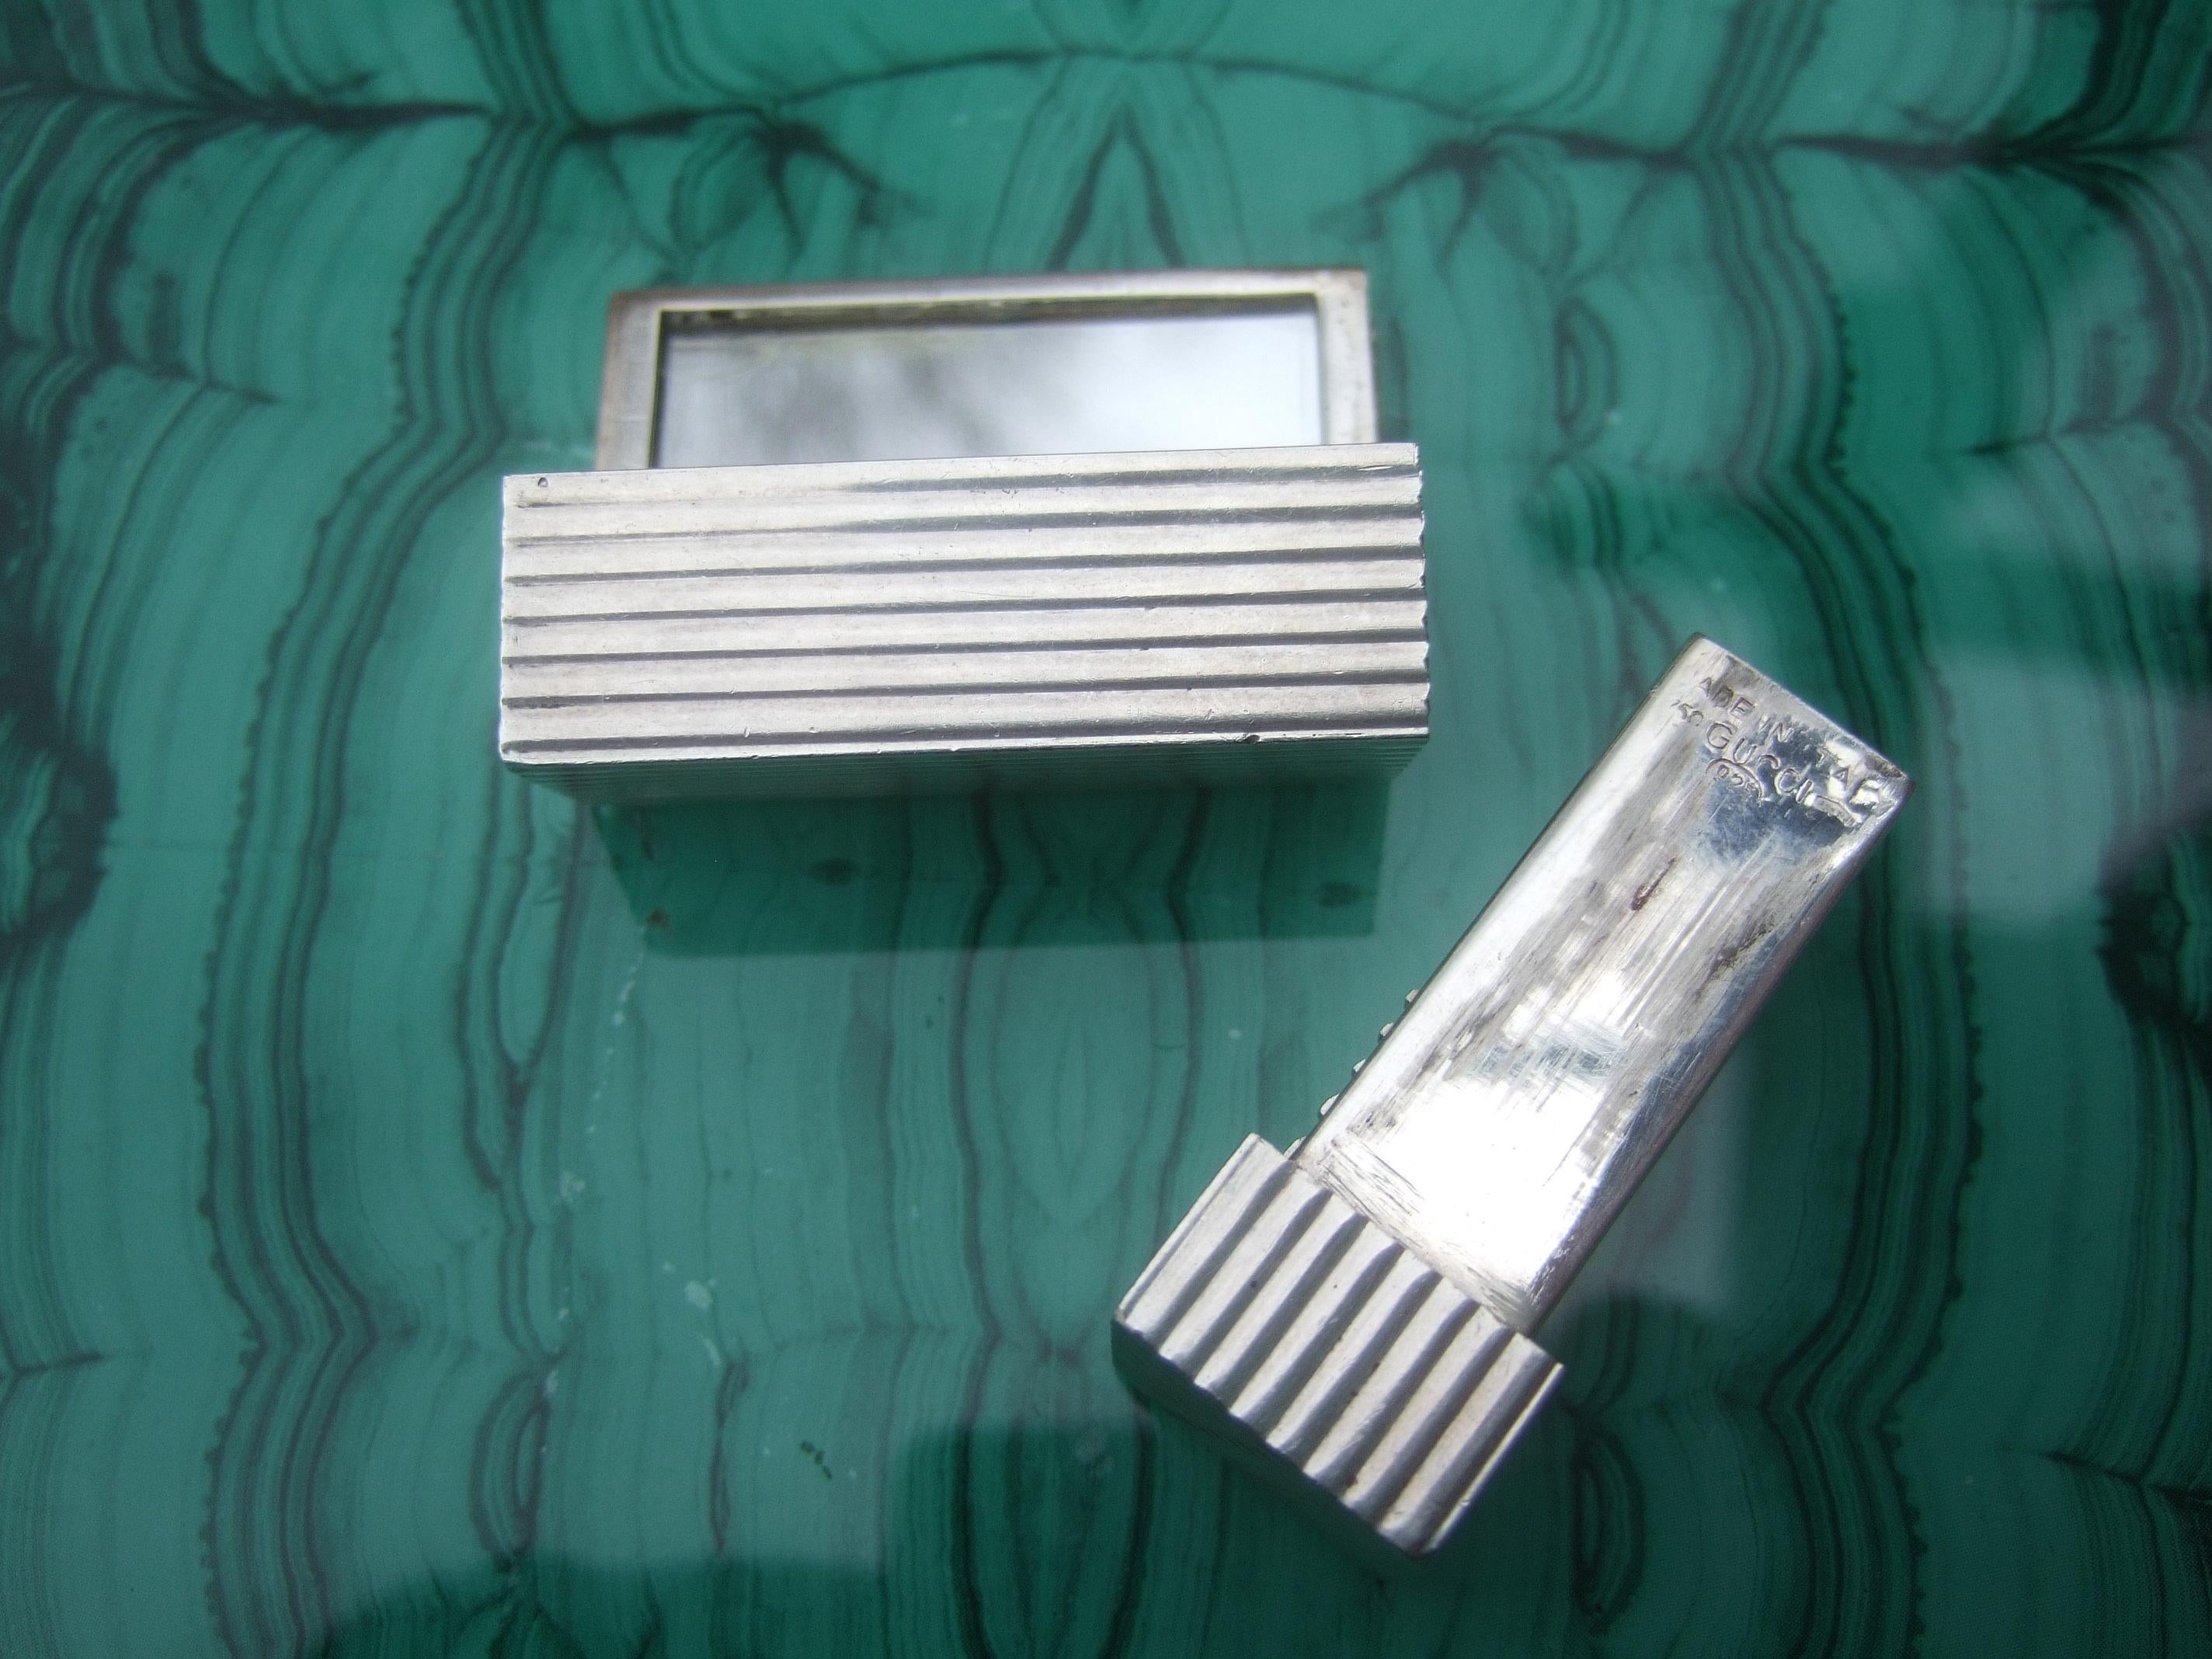 Women's Gucci Italy Rare Sterling Silver Sleek Lipstick Vanity Mirror Case c 1970s For Sale